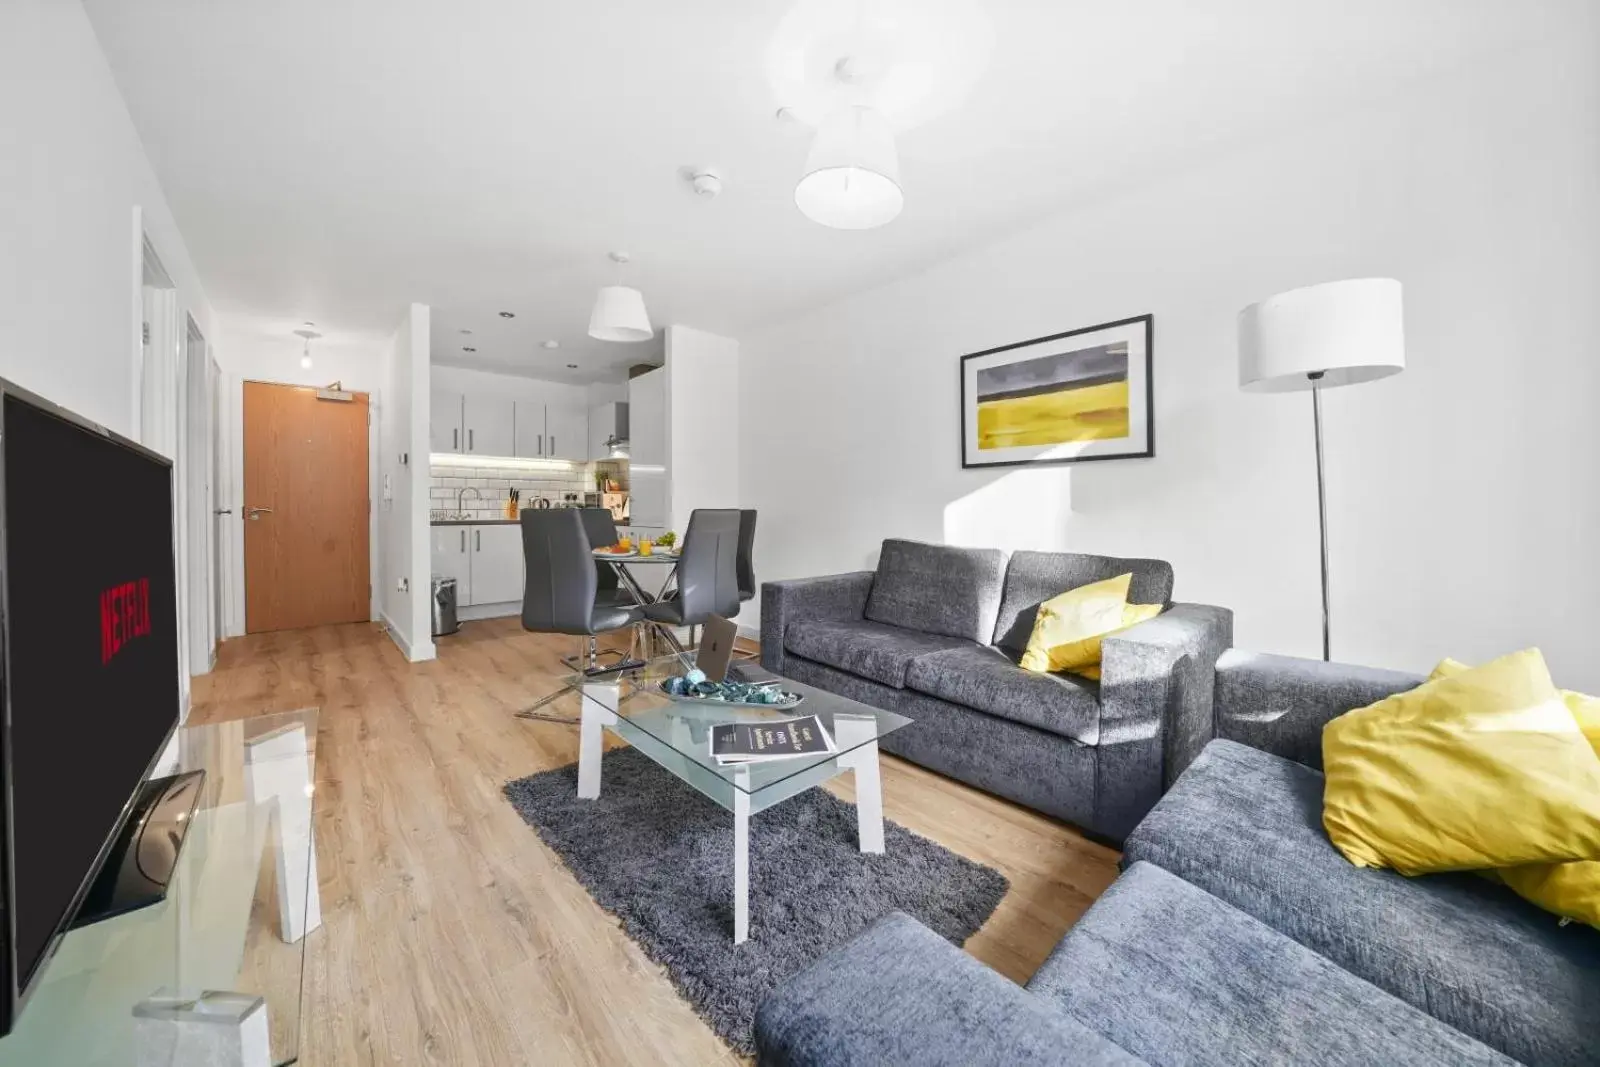 TV and multimedia, Seating Area in Onyx O2 Arena Brindley Place Broad Street Large Spacious Apartment